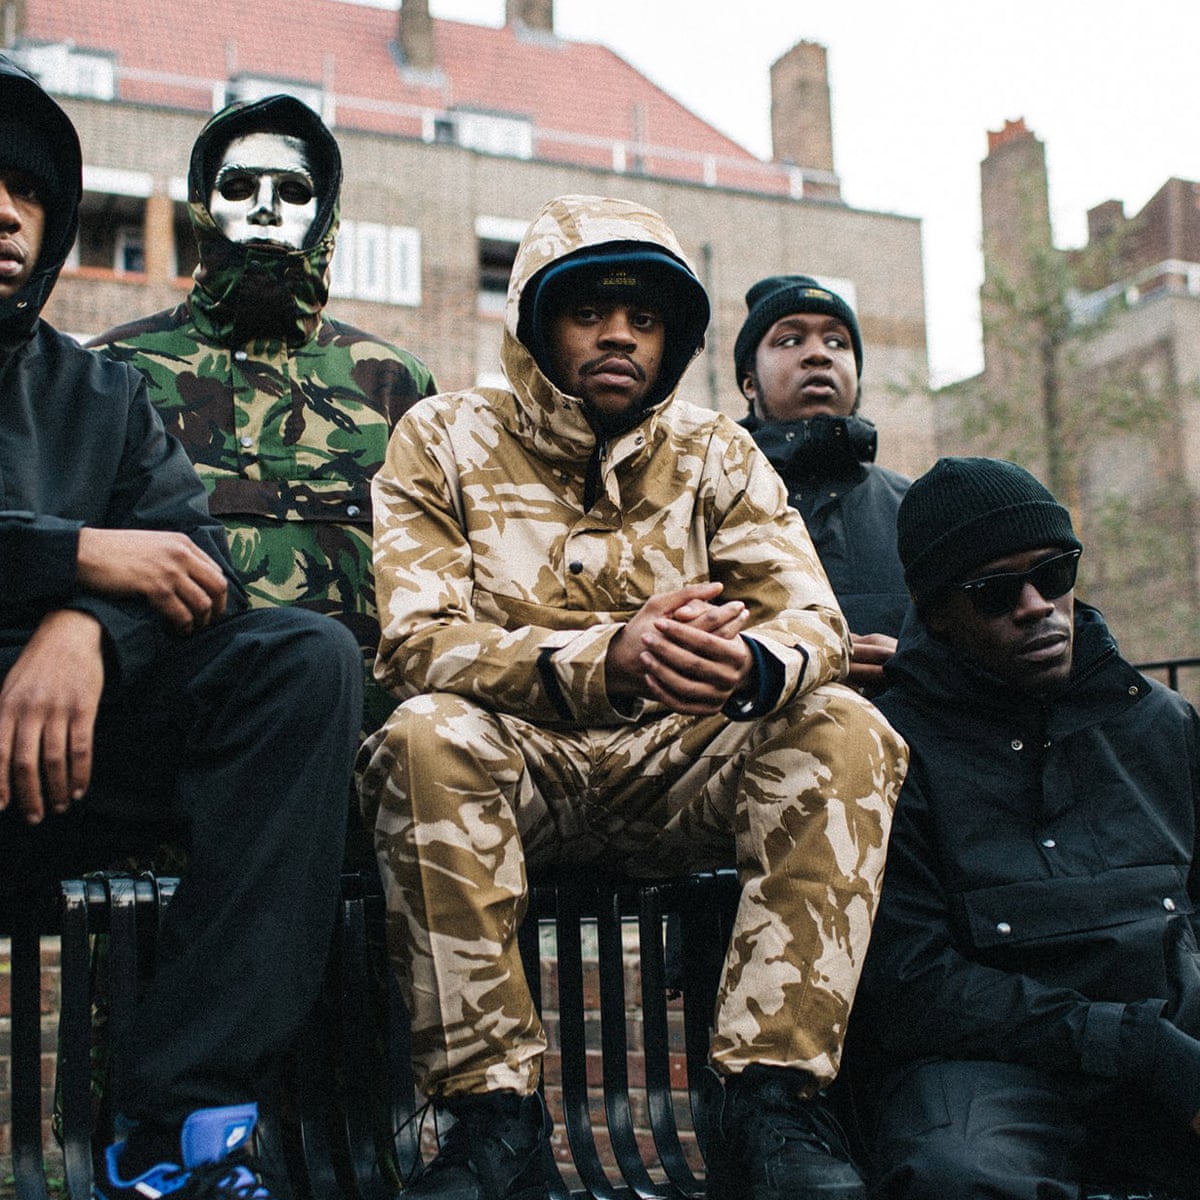 Is UK drill music really behind London's wave of violent crime?